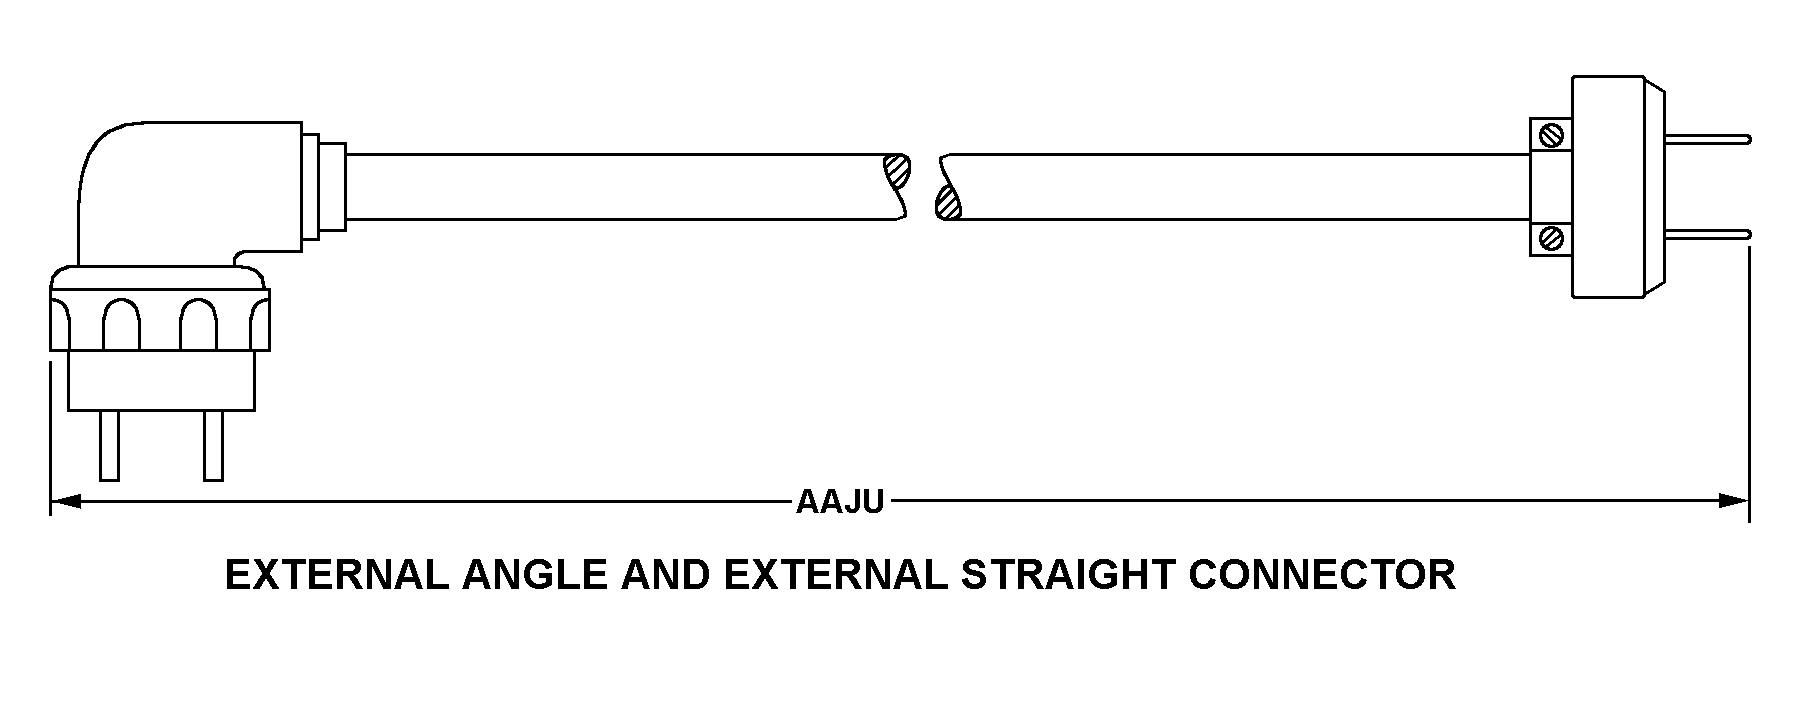 EXTERNAL ANGLE AND EXTERNAL STRAIGHT CONNECTOR style nsn 6150-01-537-8386